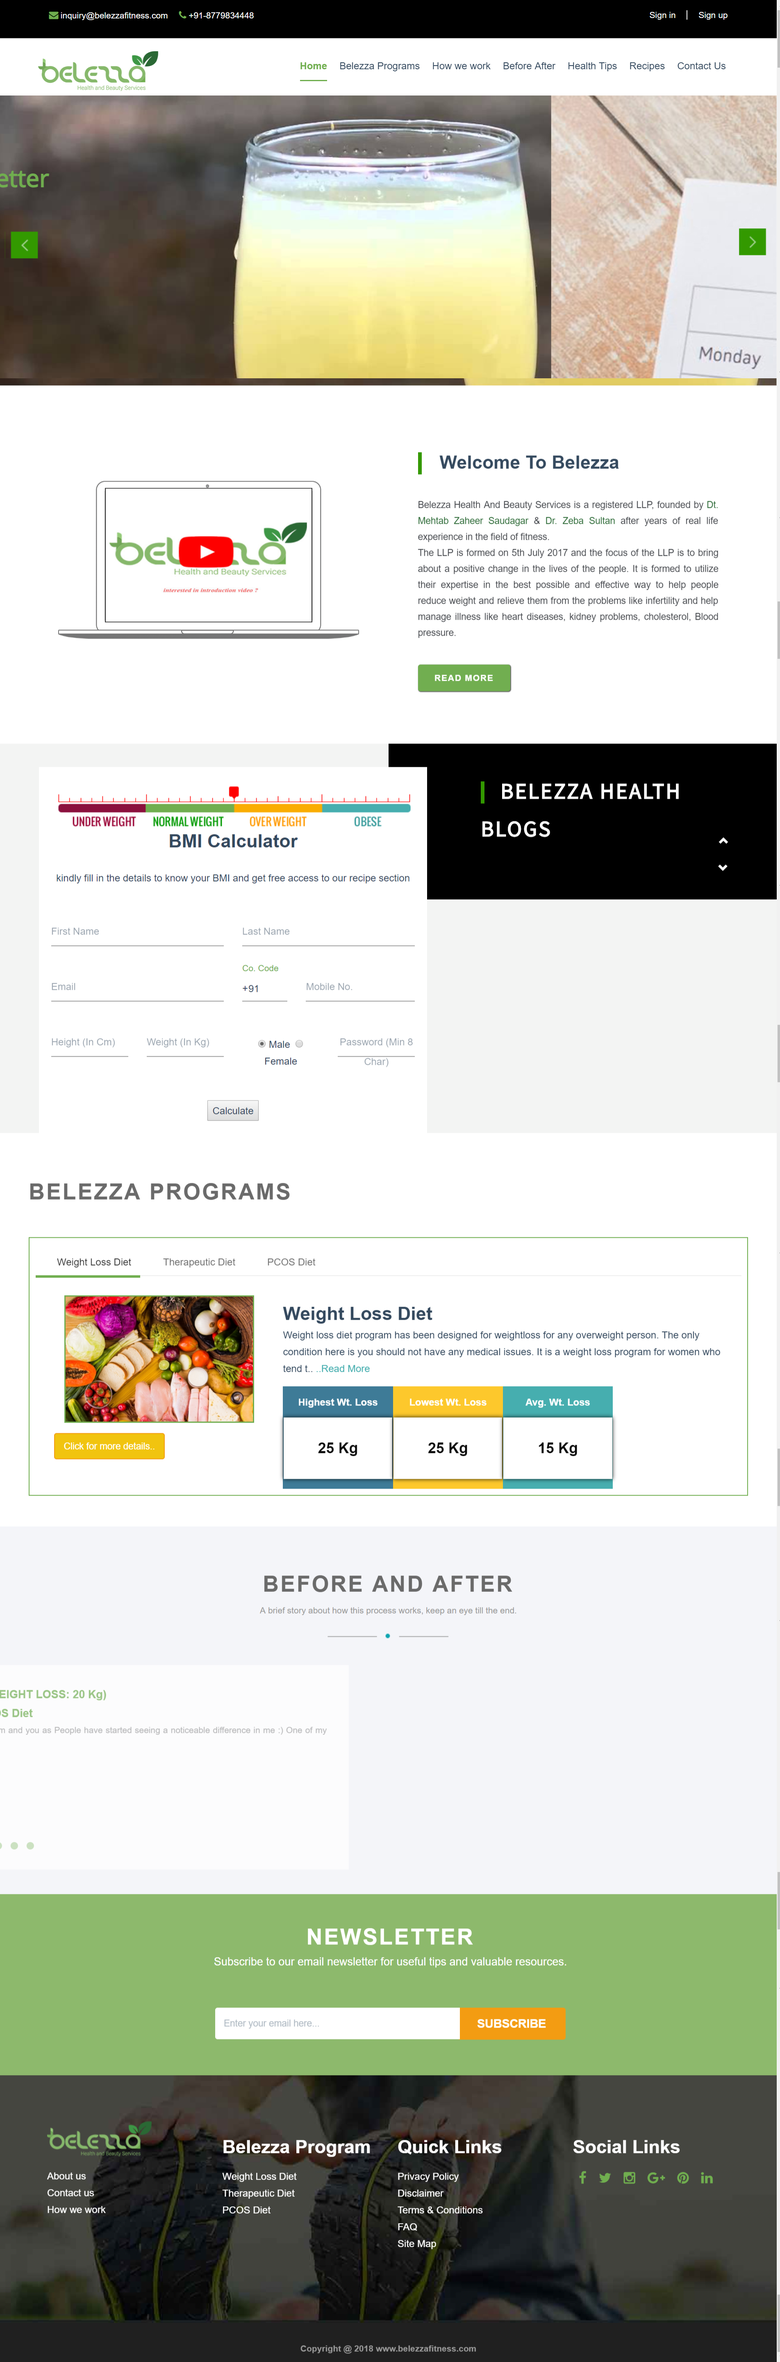 belezzafitness.com online health consulting services